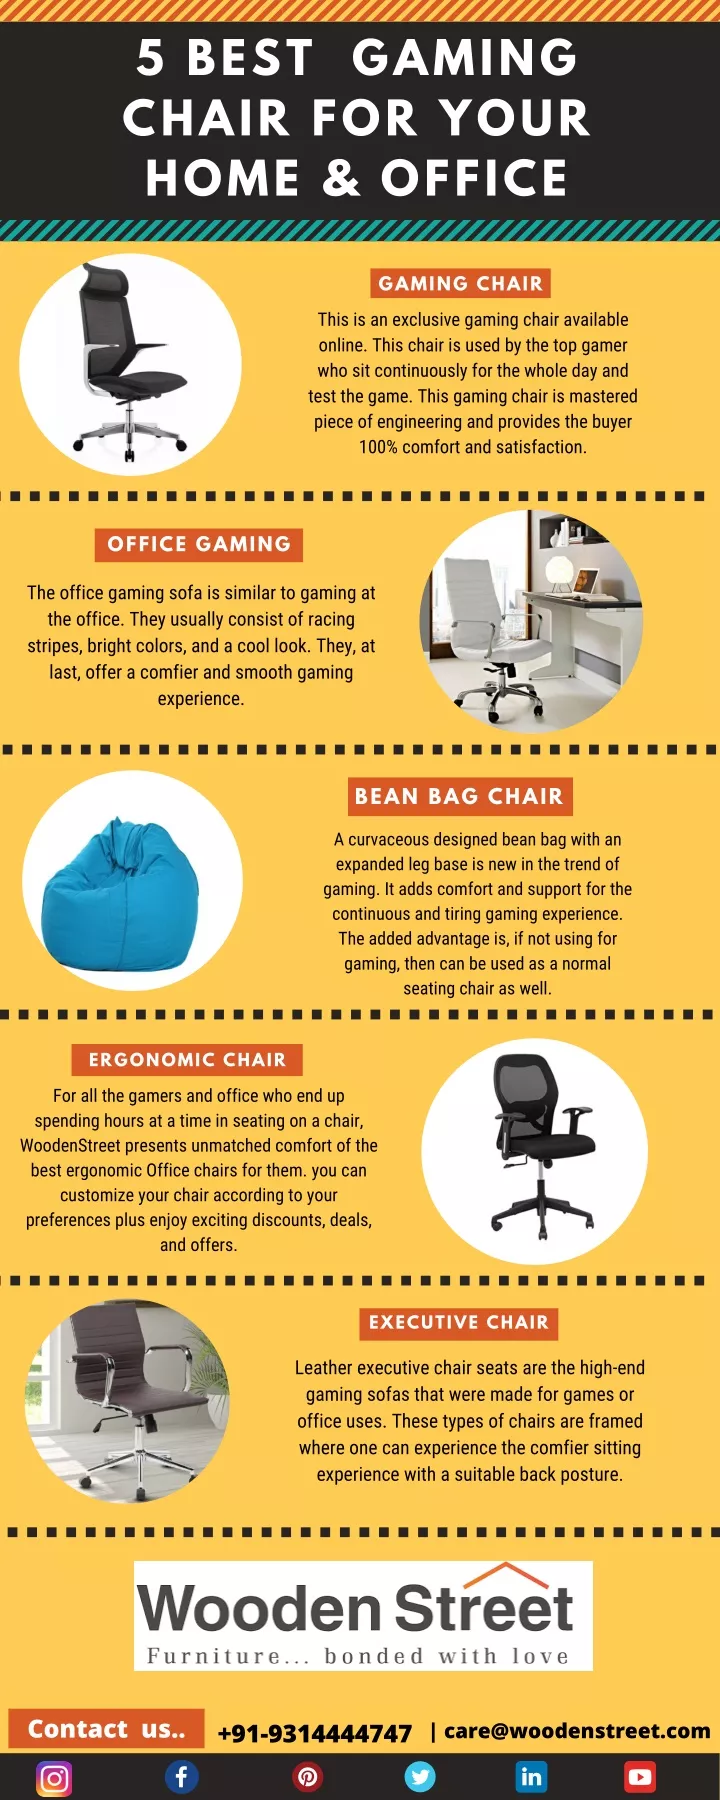 5 best gaming chair for your home office n.